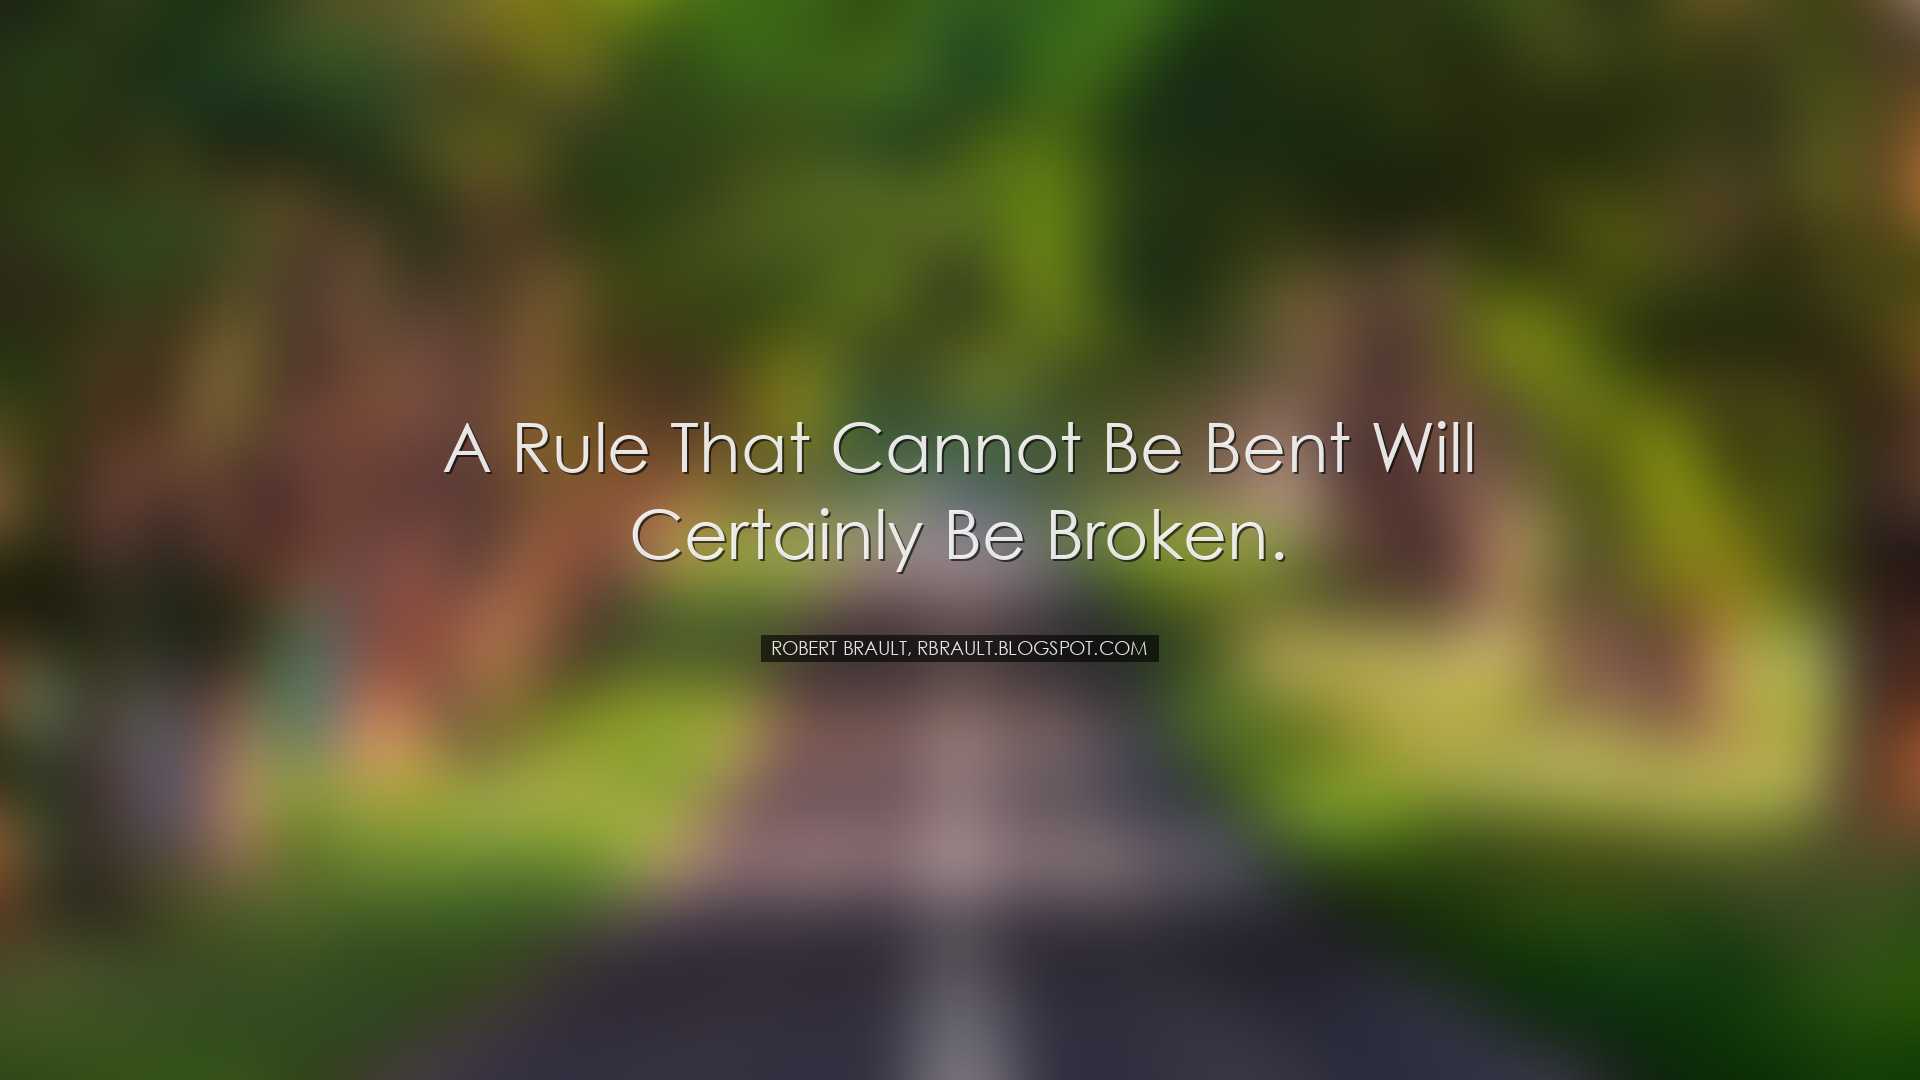 A rule that cannot be bent will certainly be broken. - Robert Brau